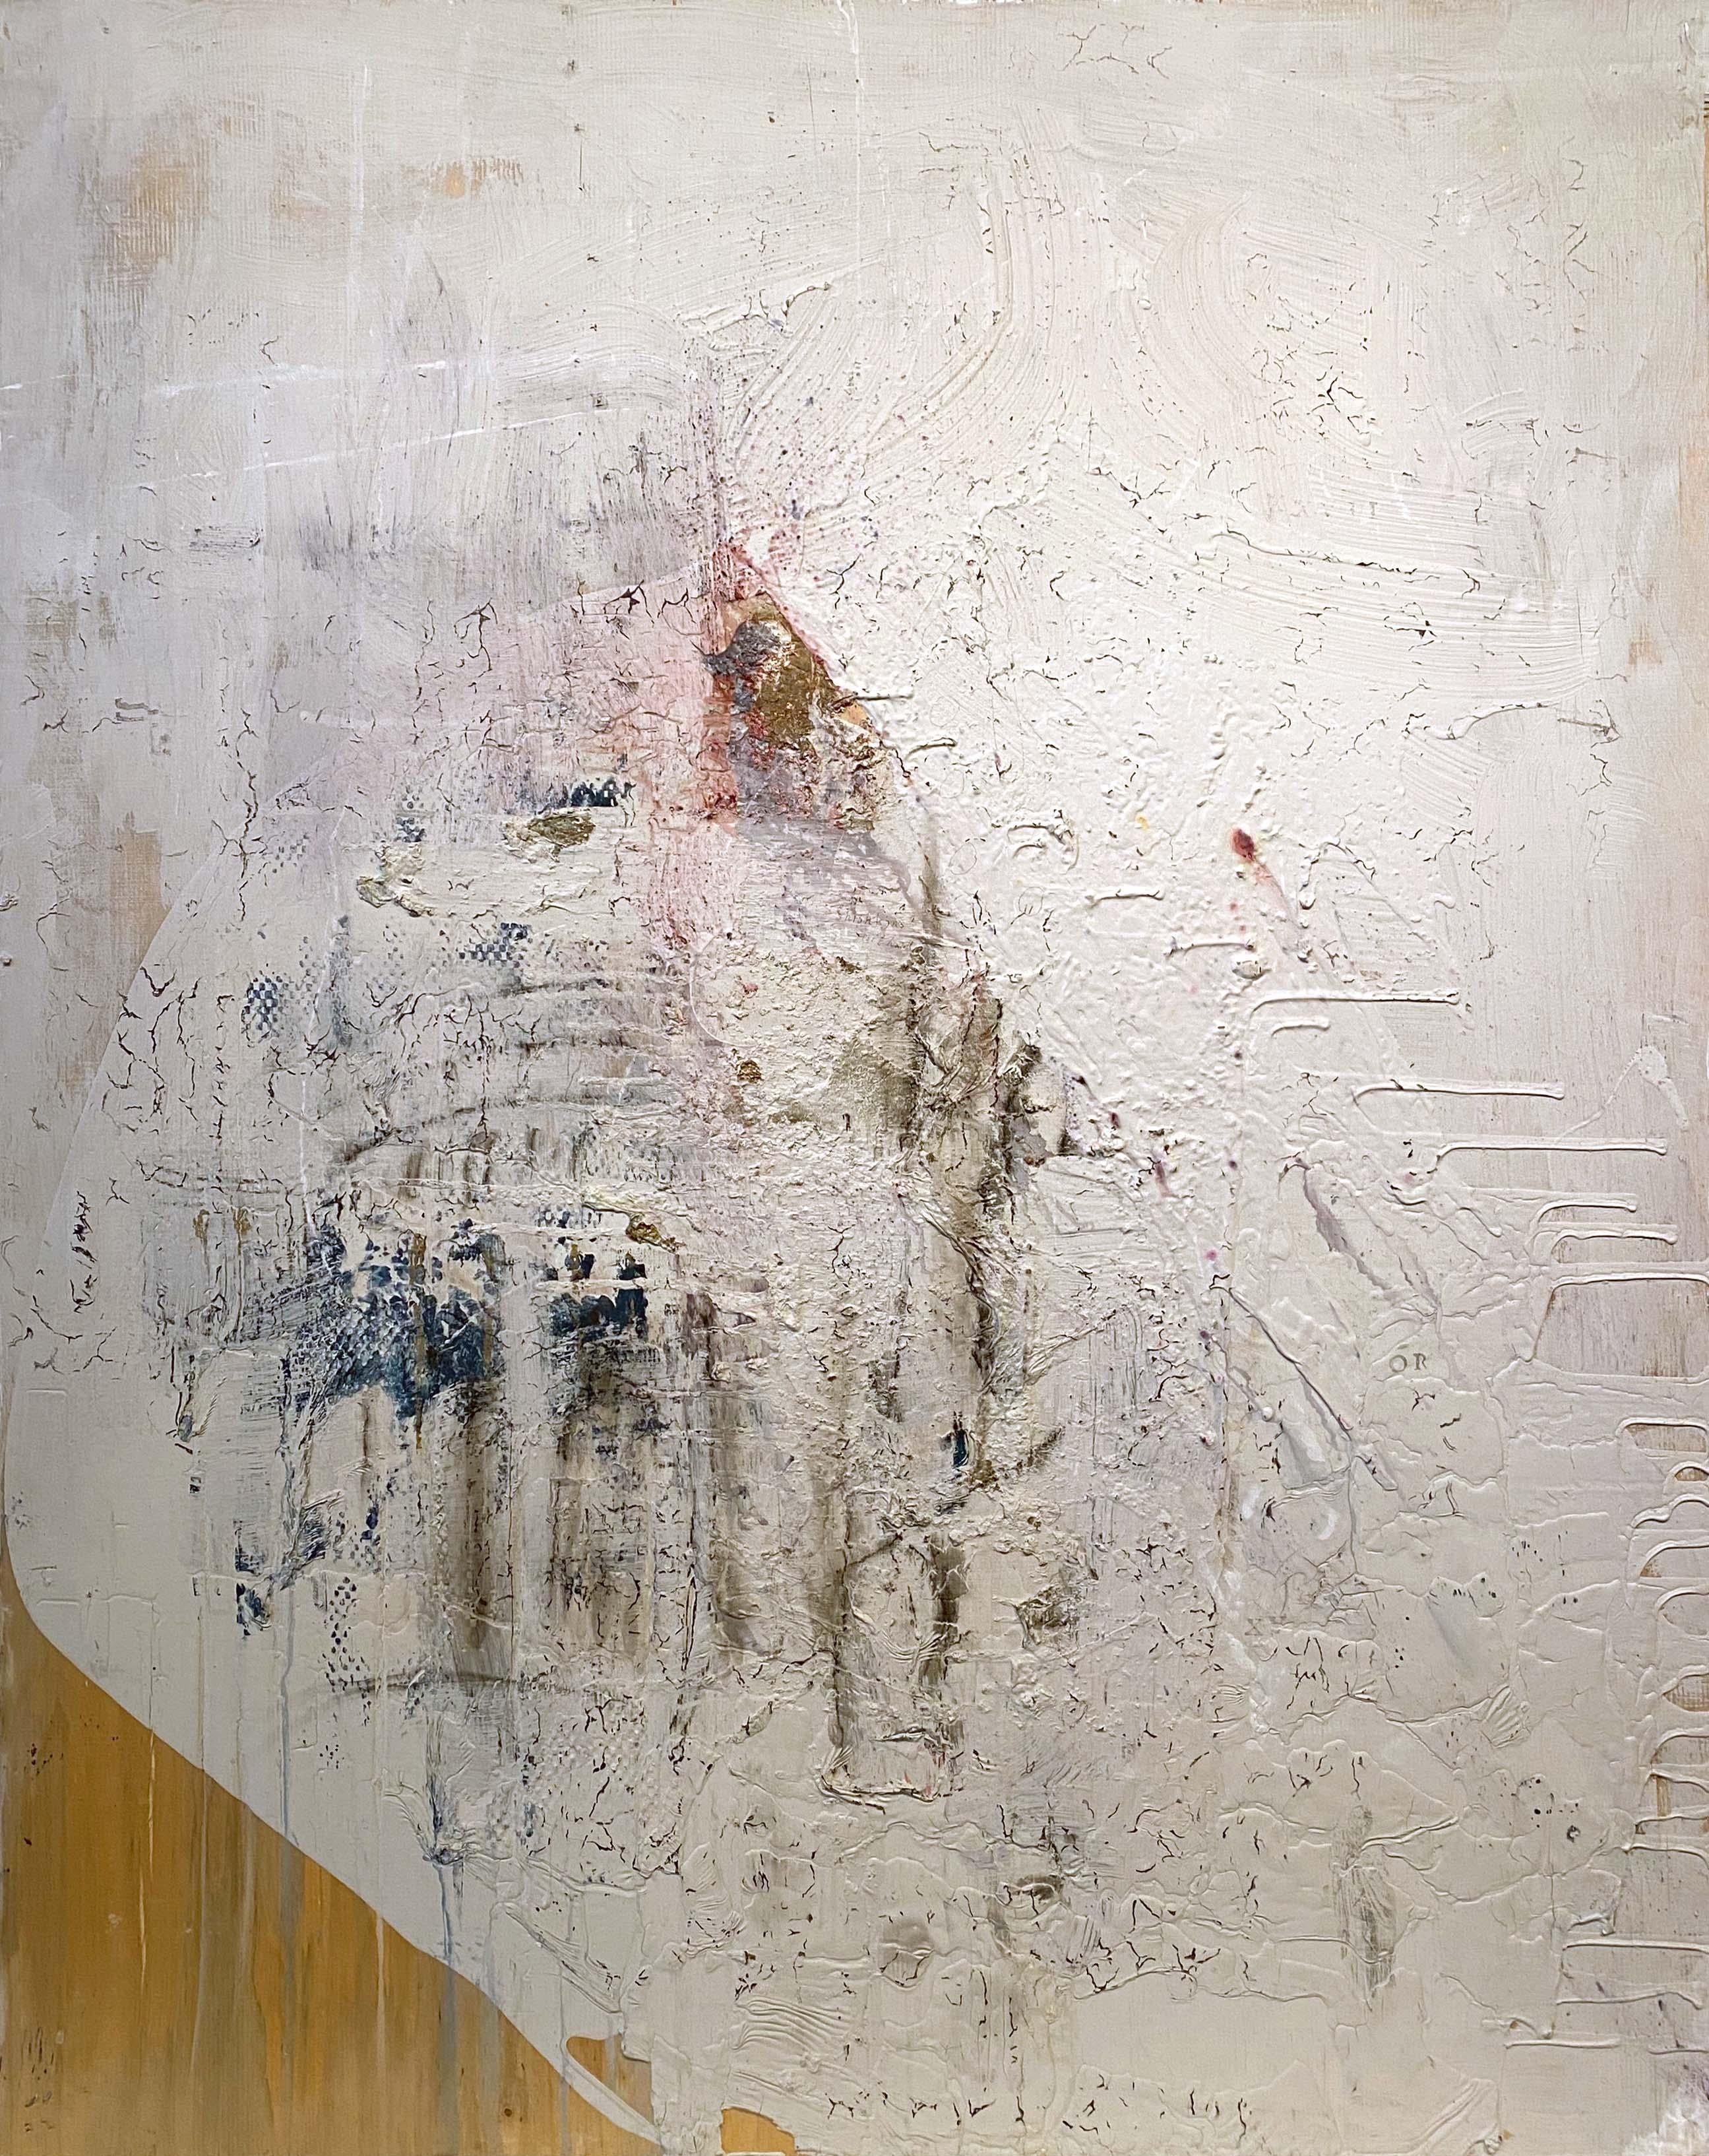 Nicholas Evans Abstract Painting - "Dome and Spire" (abstract, architectural, cerebral, white painting on wood)